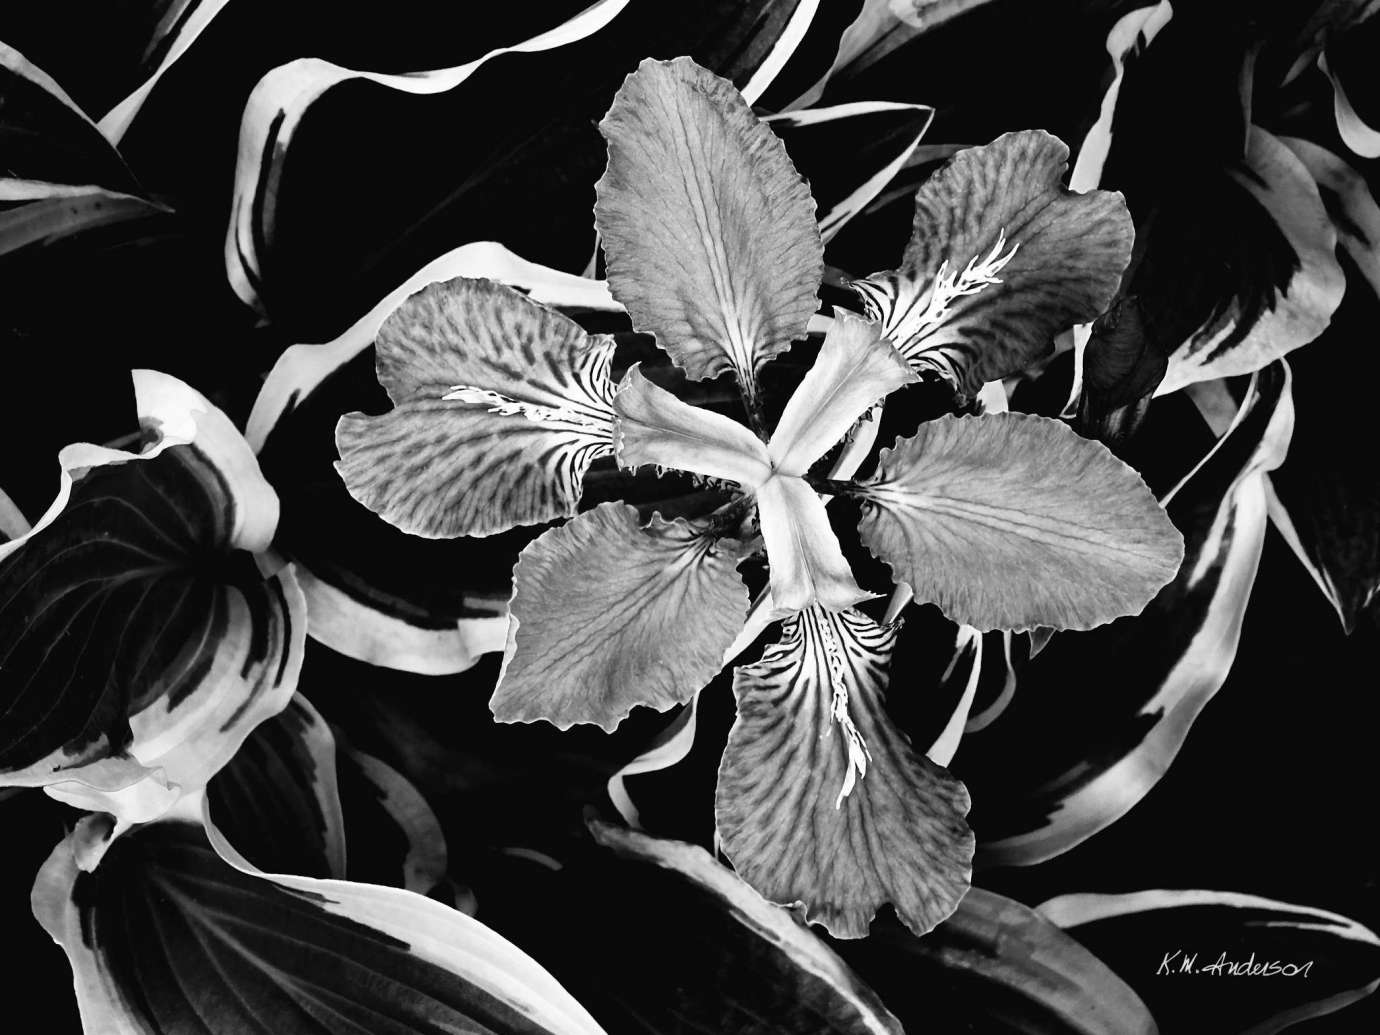 Black and white photo of a flower surrounded by other petals and leaves